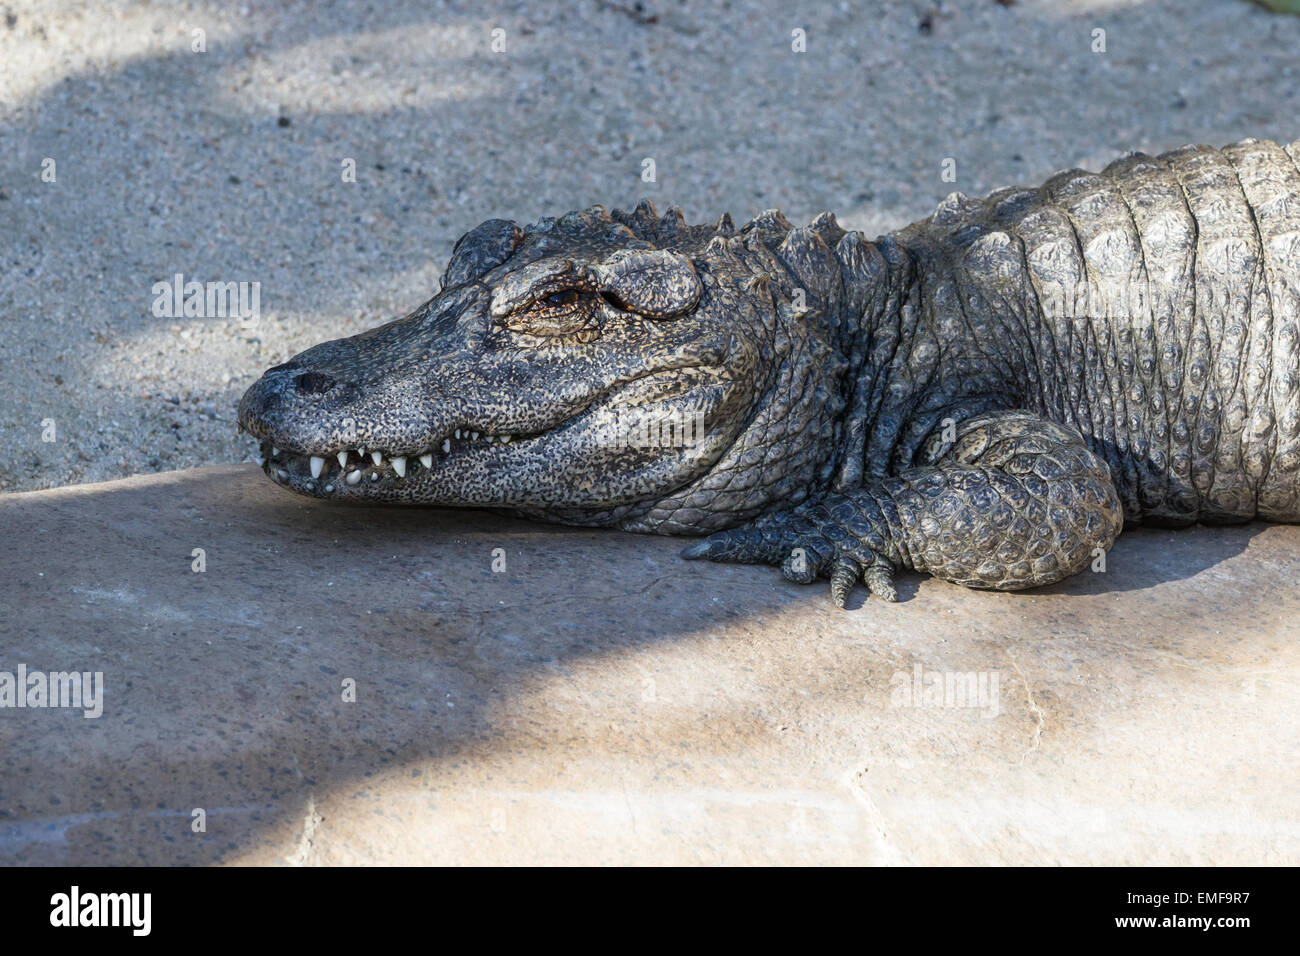 Chinese alligator resting on a concrete pad at a zoo in California Stock Photo